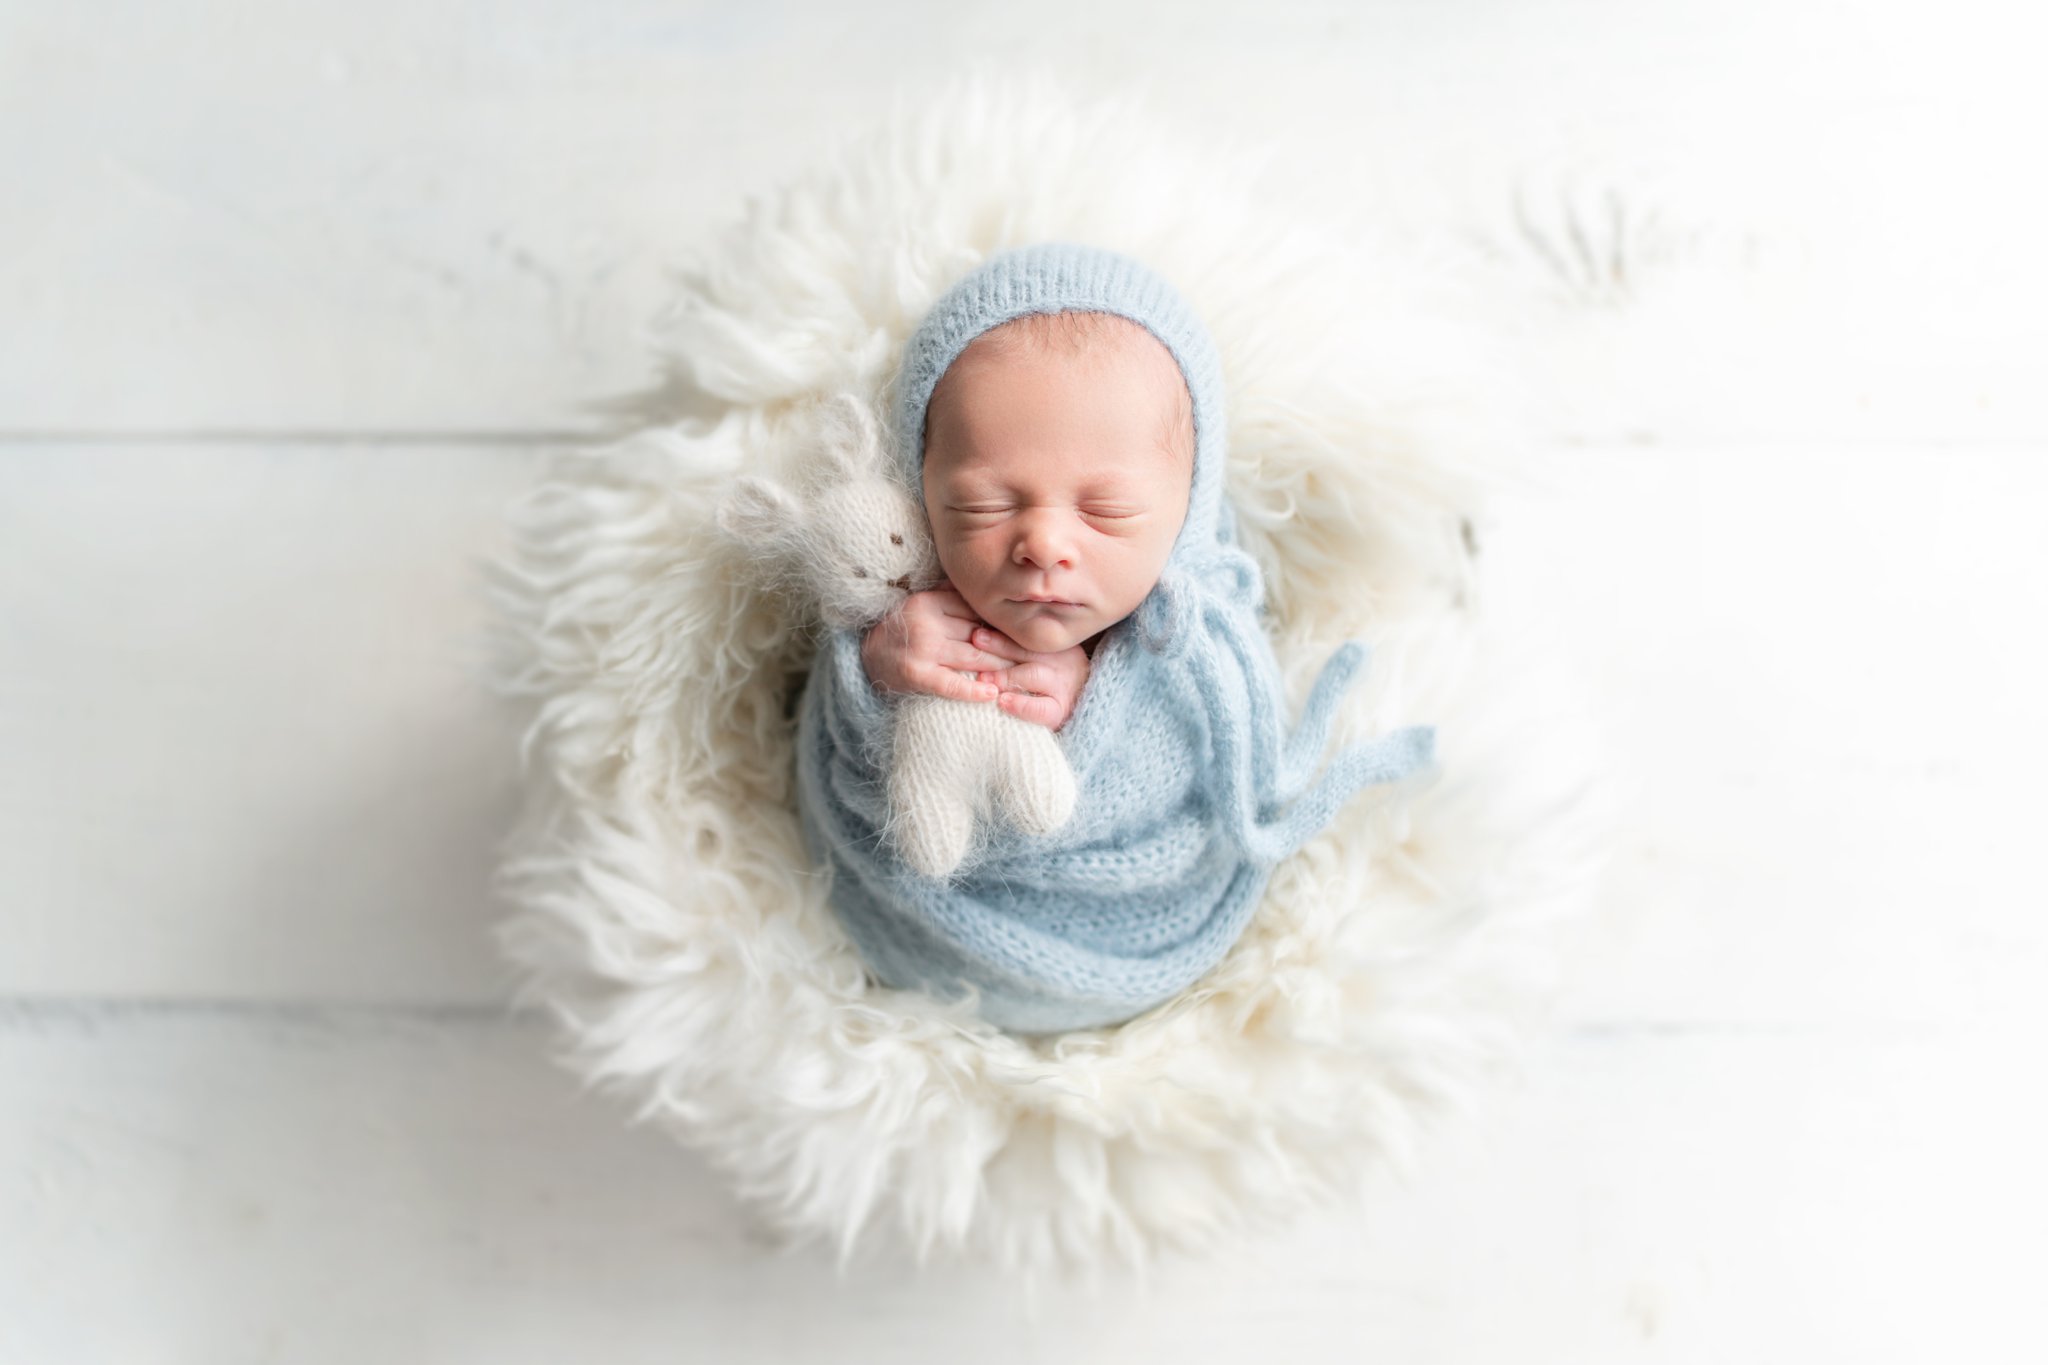 Newborn baby in baby blue swaddle and wearing a blue knitted hat, holding a knitted bunny being photographed in south florida photo studio.